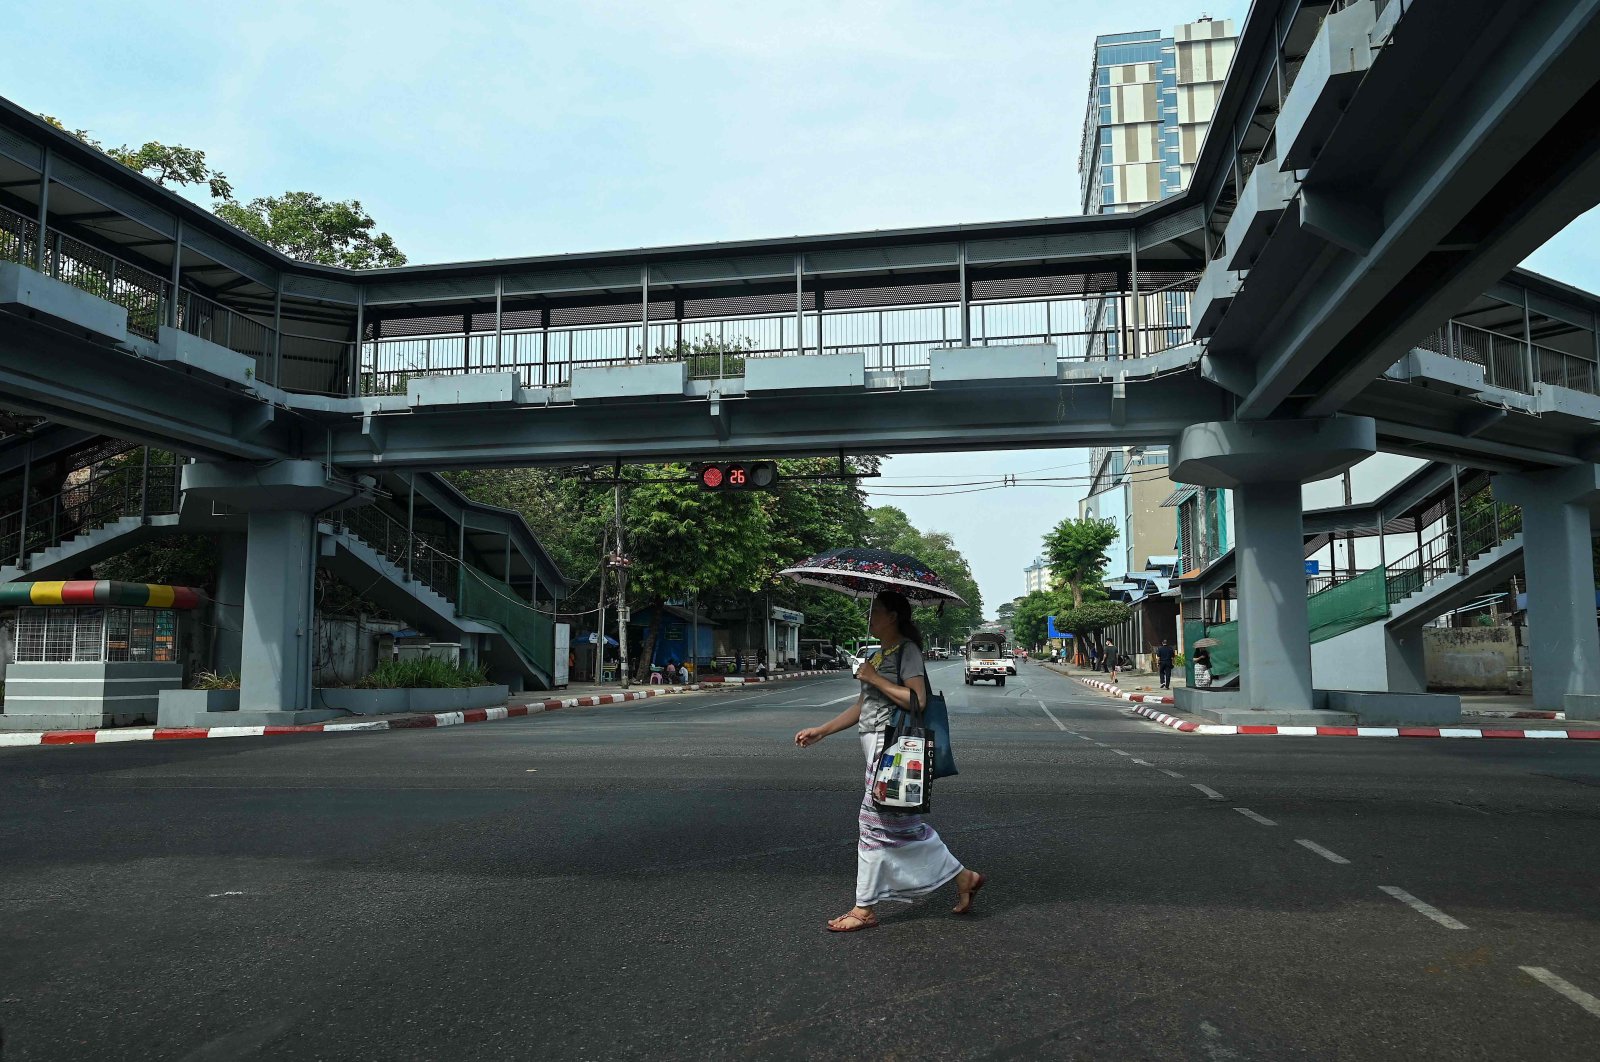 A woman crosses an almost empty street near Sule Pagoda during a &quot;silent strike&quot; to protest and mark the second anniversary of the coup, Yangon, Myanmar, Feb. 1, 2023. (AFP Photo)